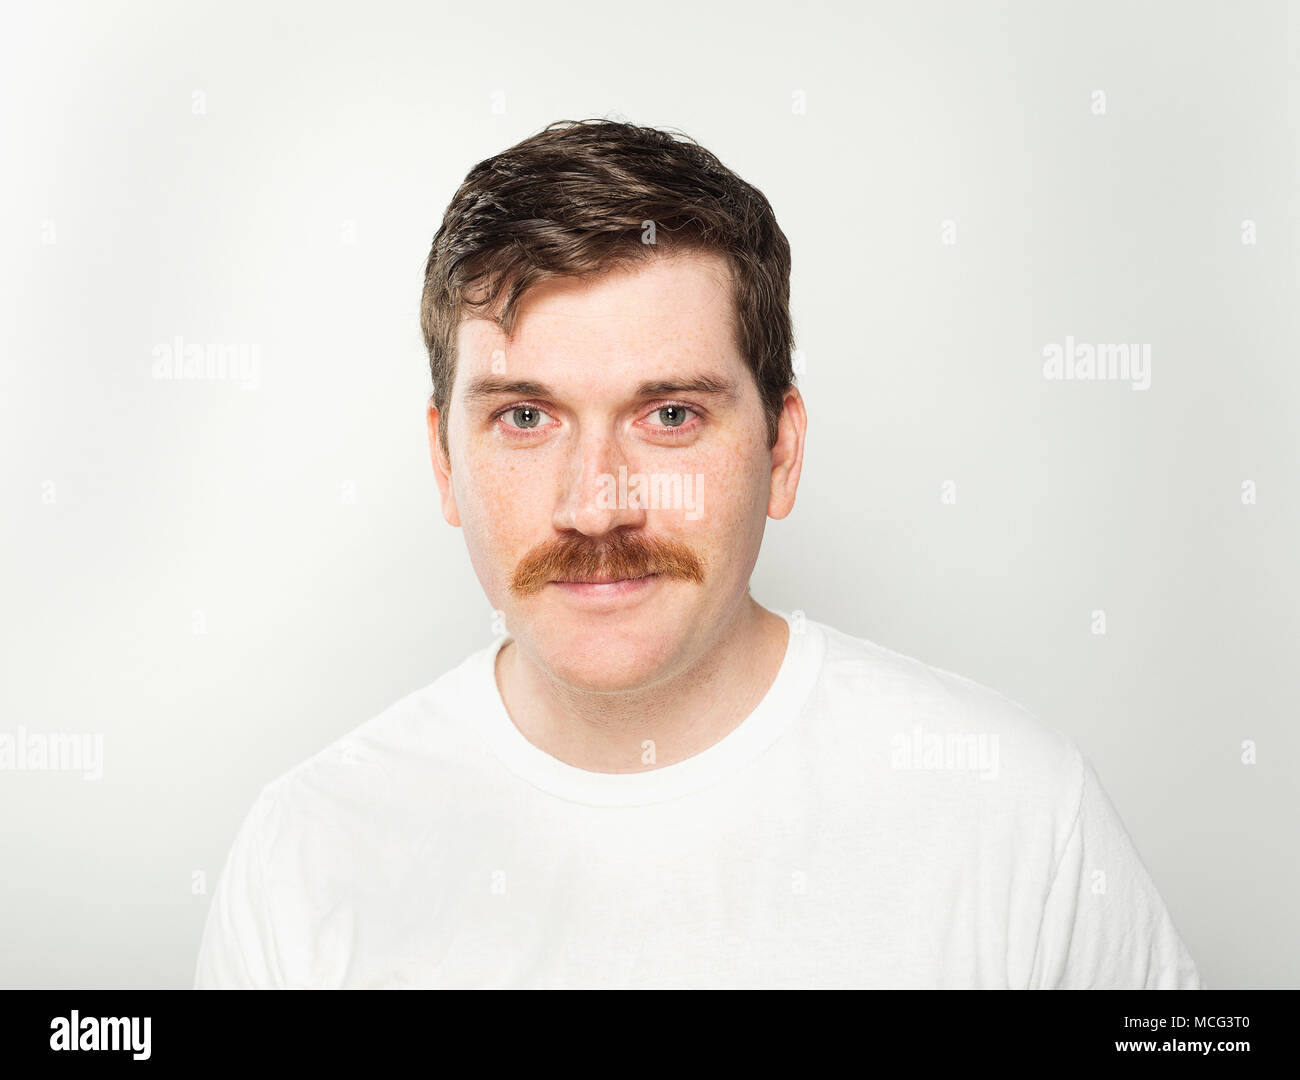 A smirking man and his moustache. Stock Photo